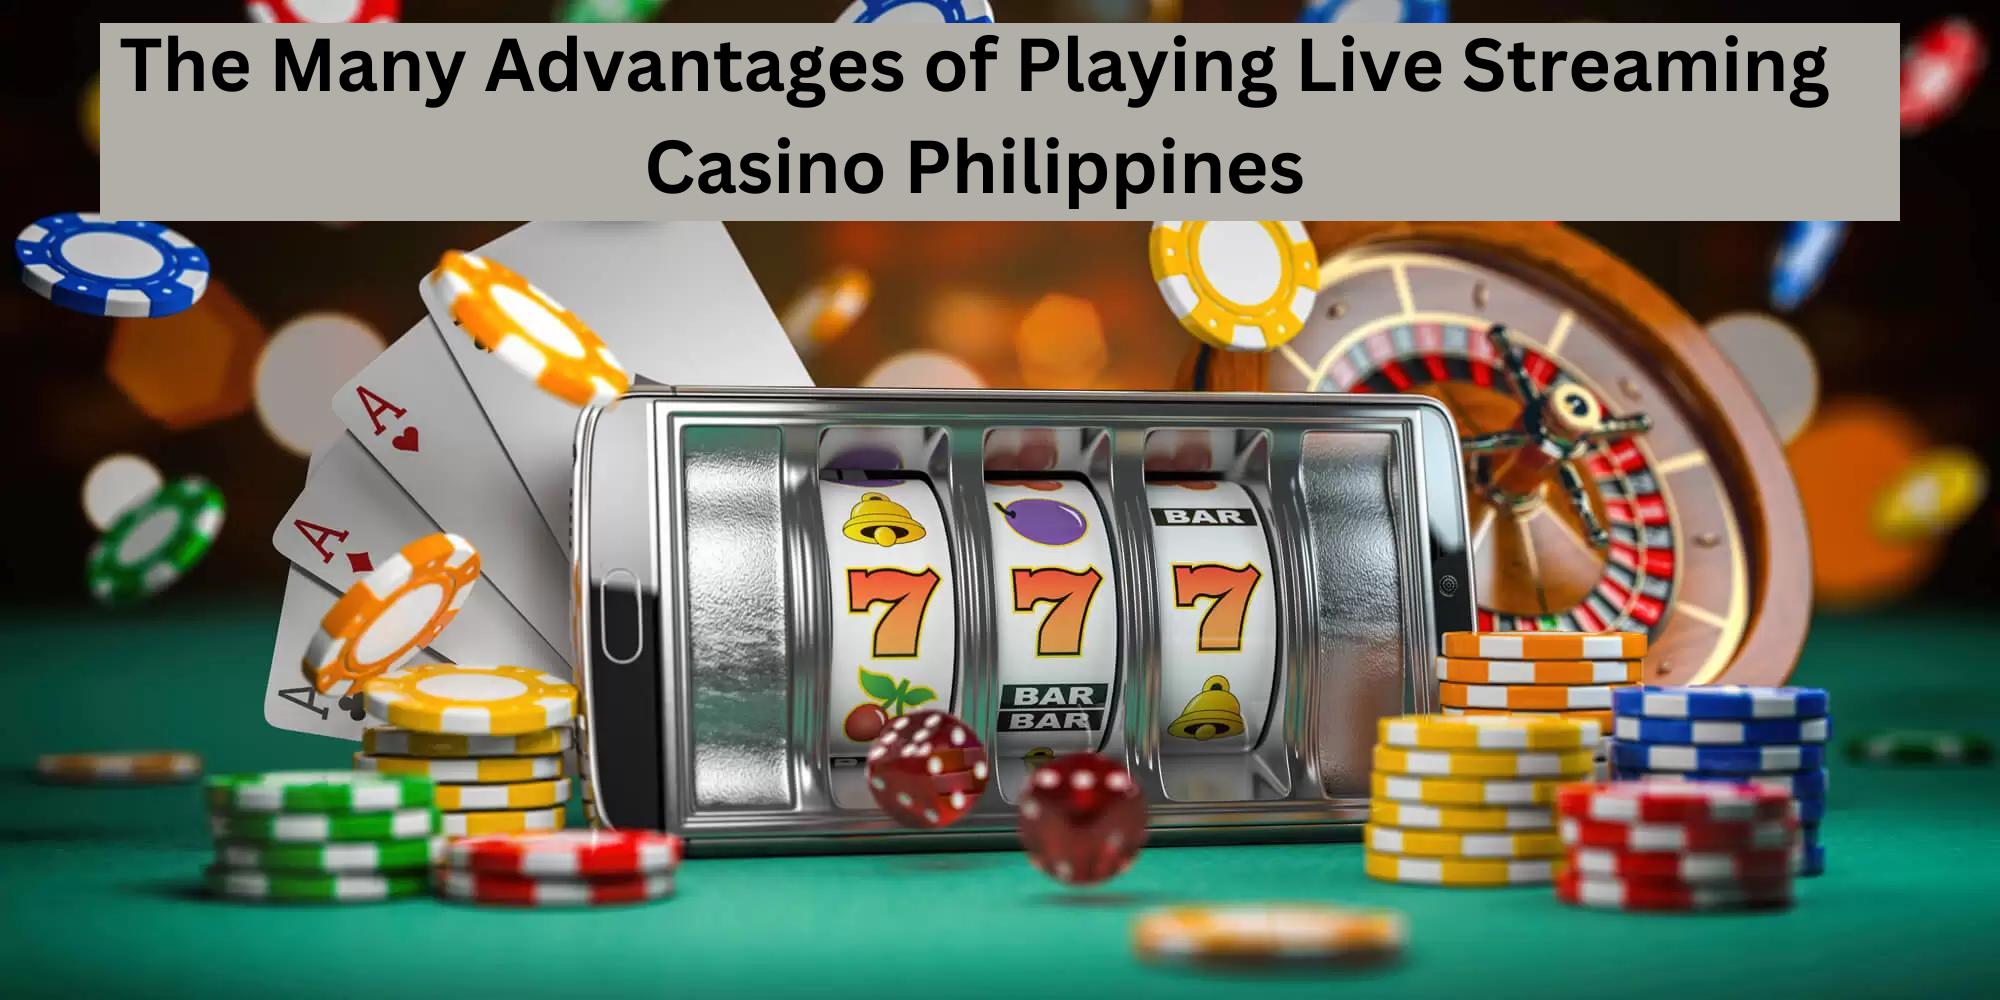 The Many Advantages of Playing Live-Streaming Casino Philippines